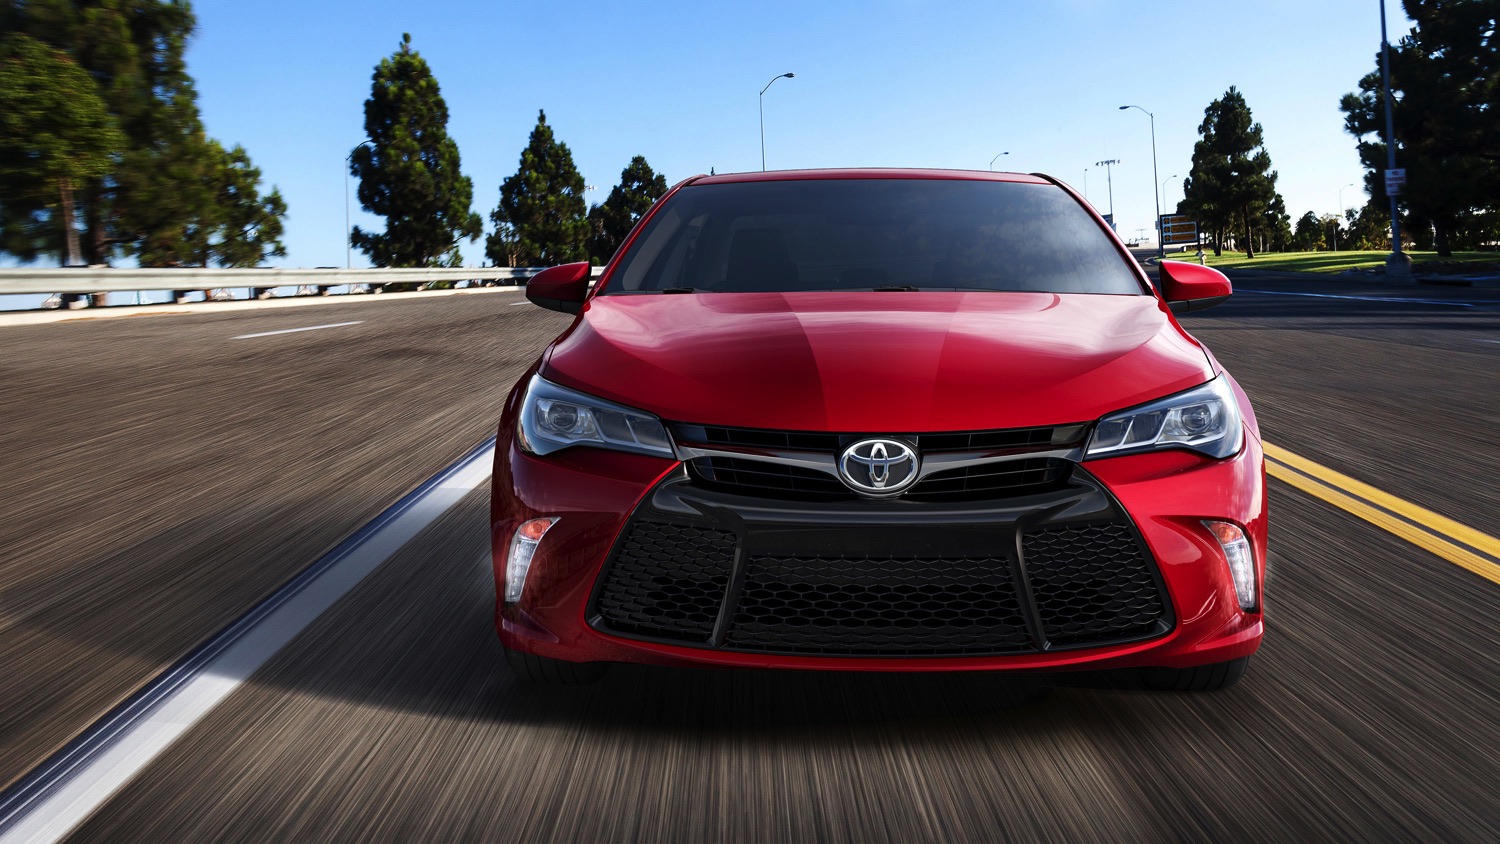 The 2015 Toyota Camry